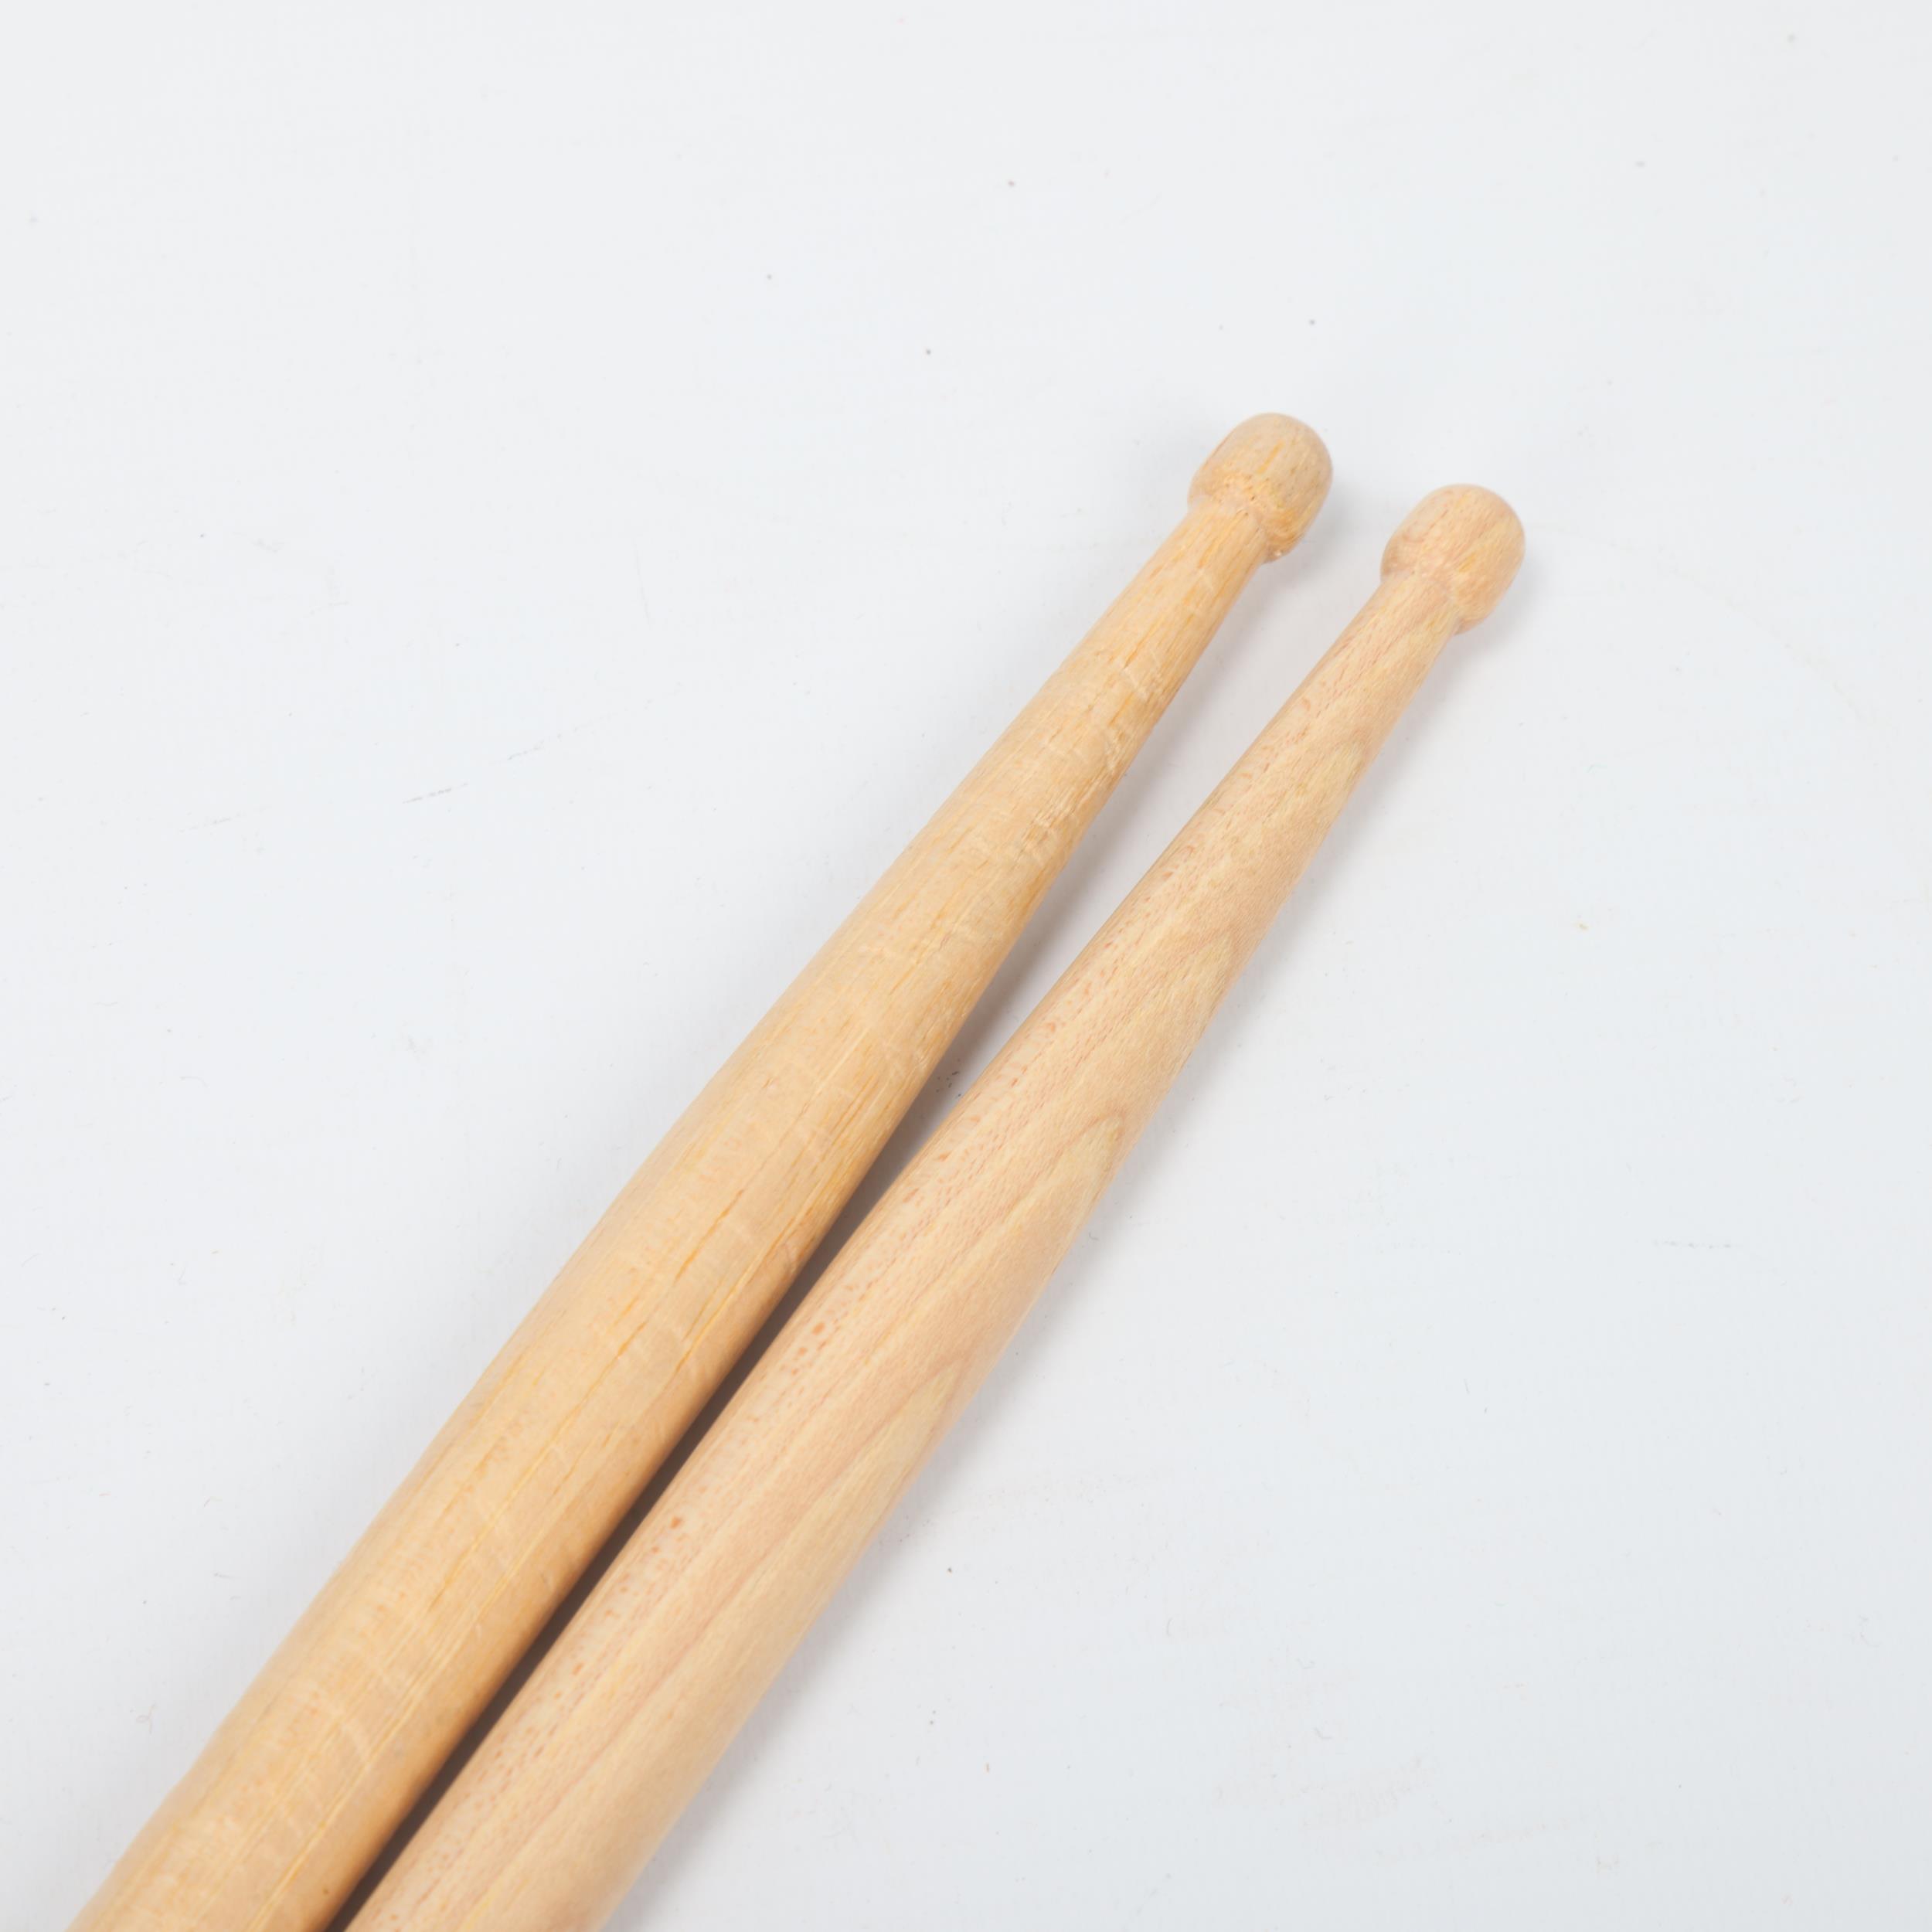 Two USED VATER 'EXCEL' Hickory DRUMSTICKS belonging to MITCH MITCHELL - Image 3 of 3